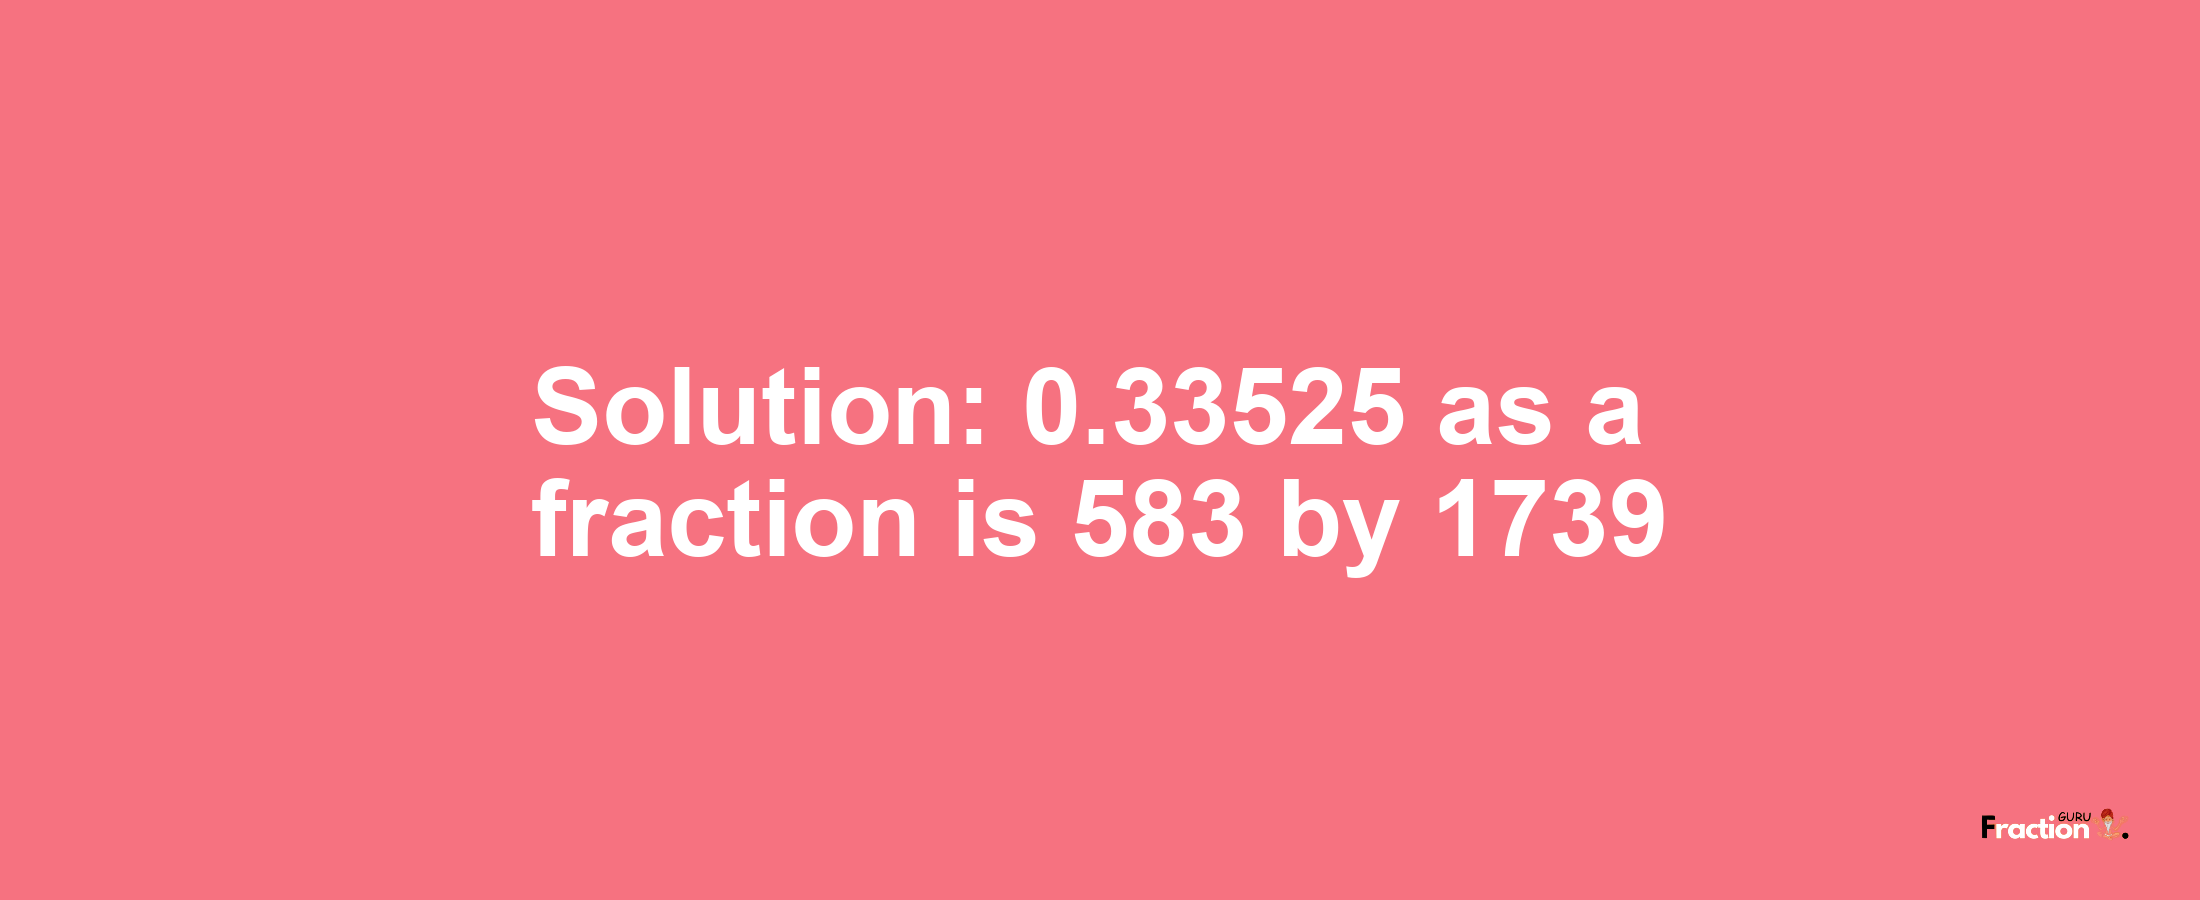 Solution:0.33525 as a fraction is 583/1739